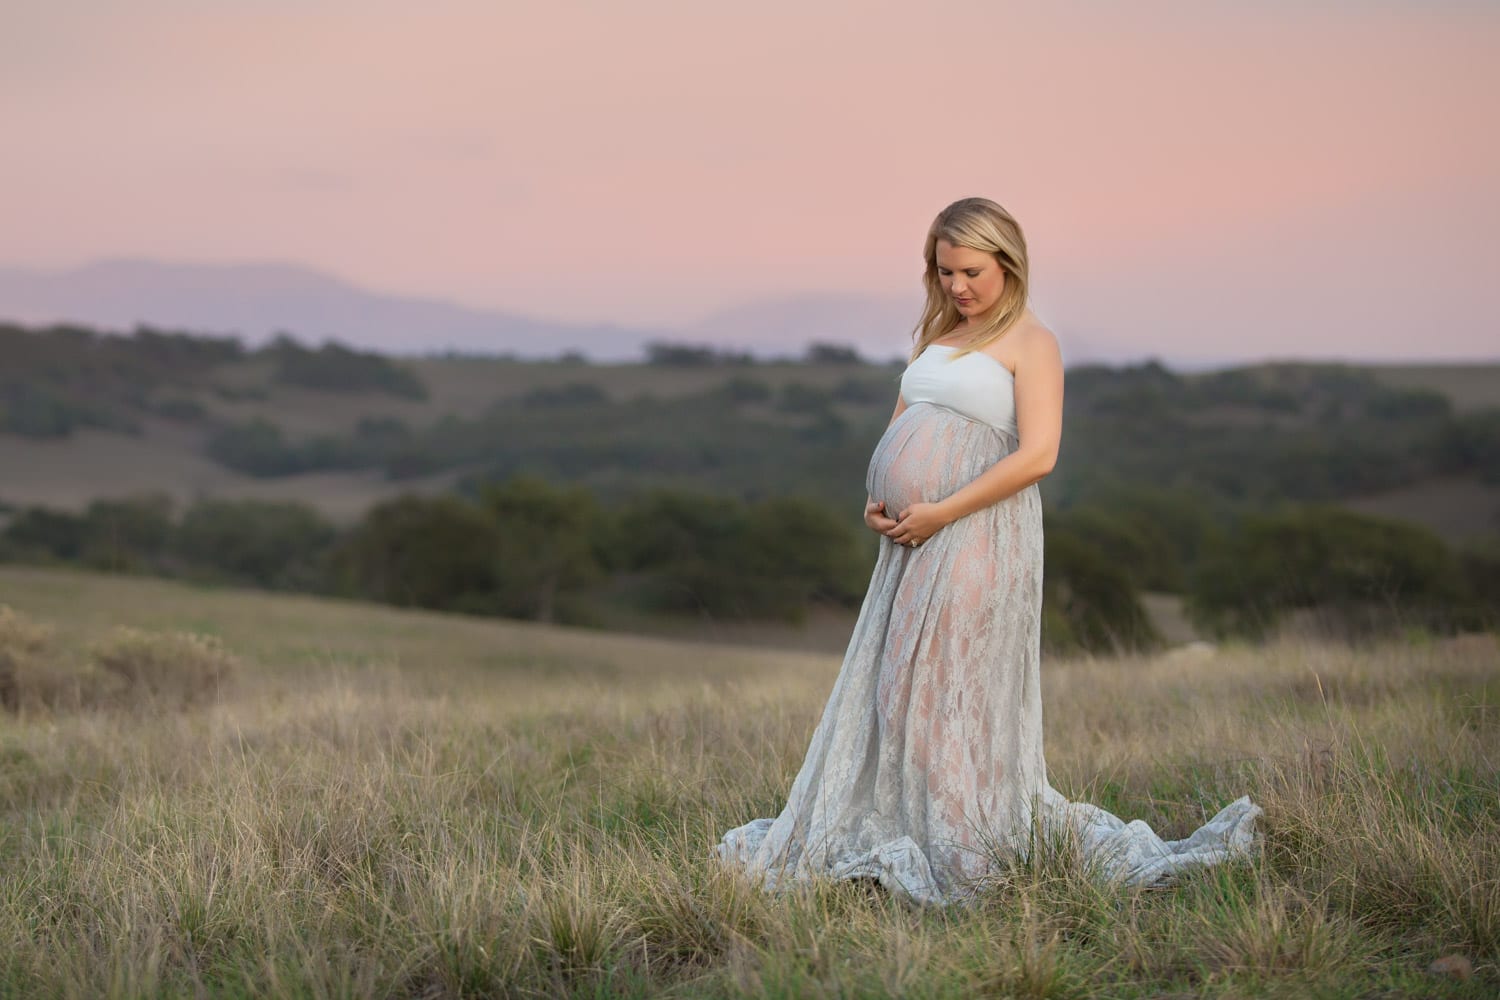 Portland_Maternity_Photographer_Gretchen_Barros_Photography_Gray_Gown_Sunset